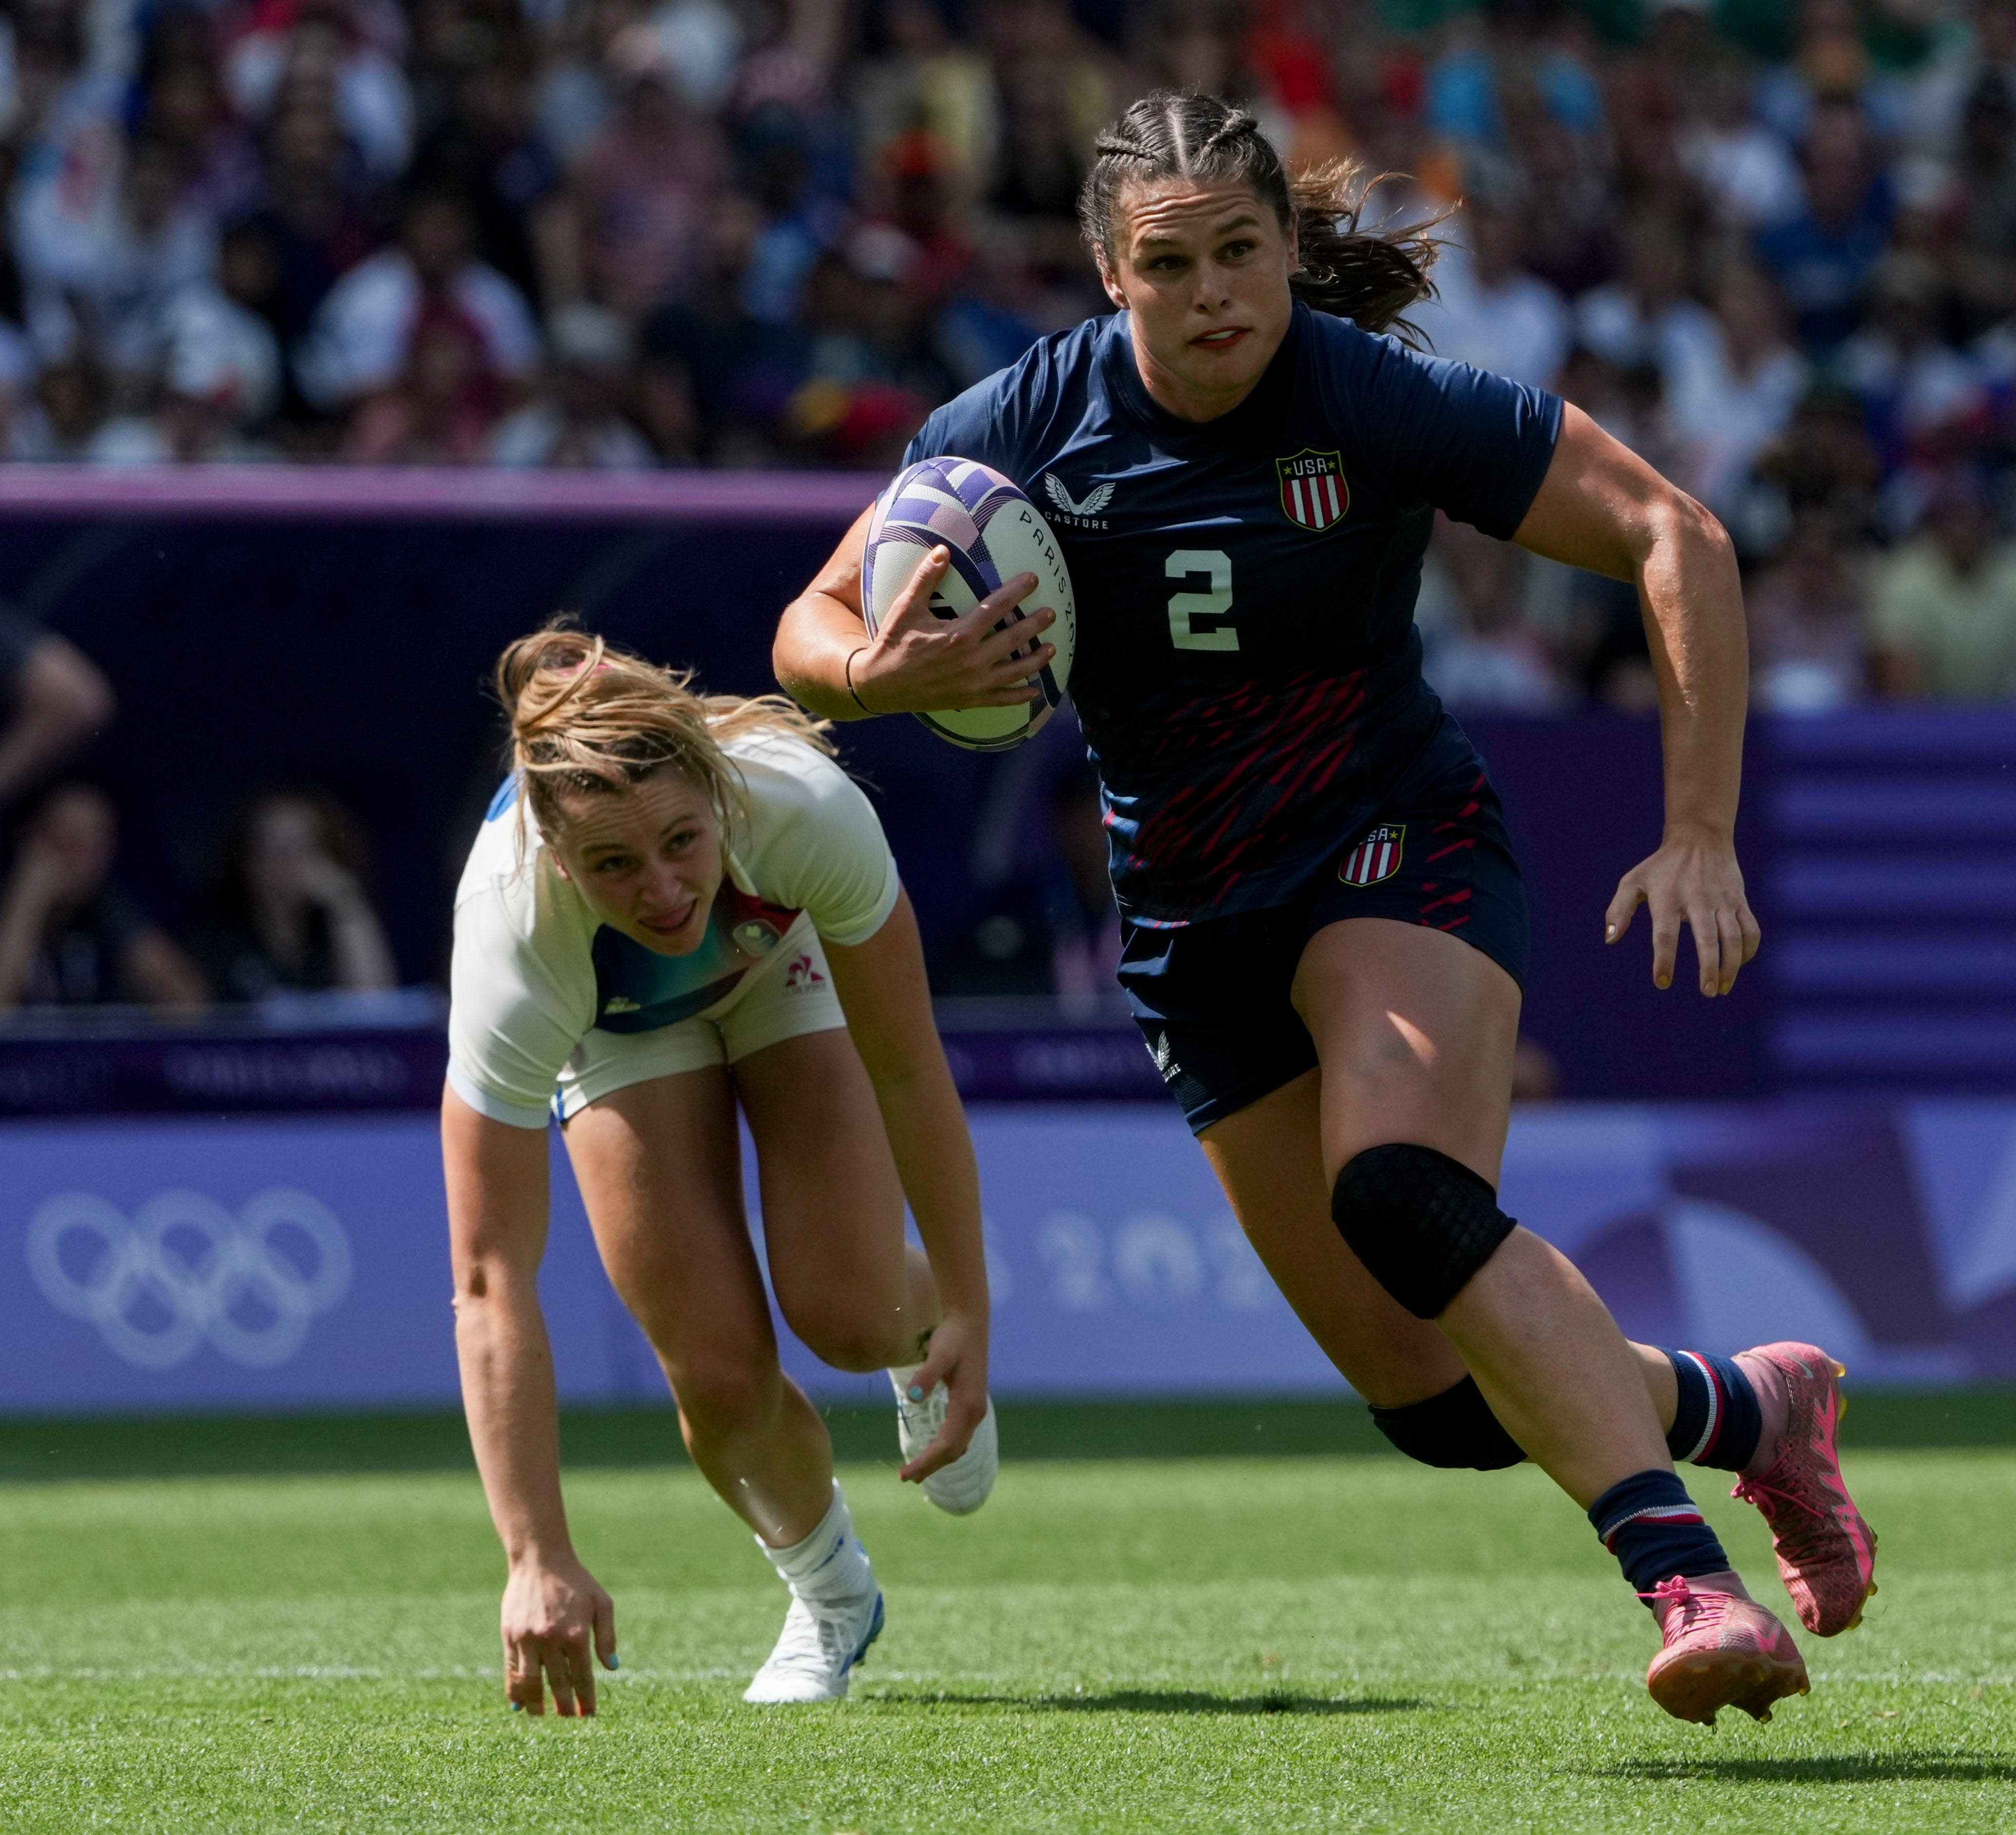 How to watch Ilona Maher and US Women's Rugby Sevens on Tuesday? Times, streaming and more